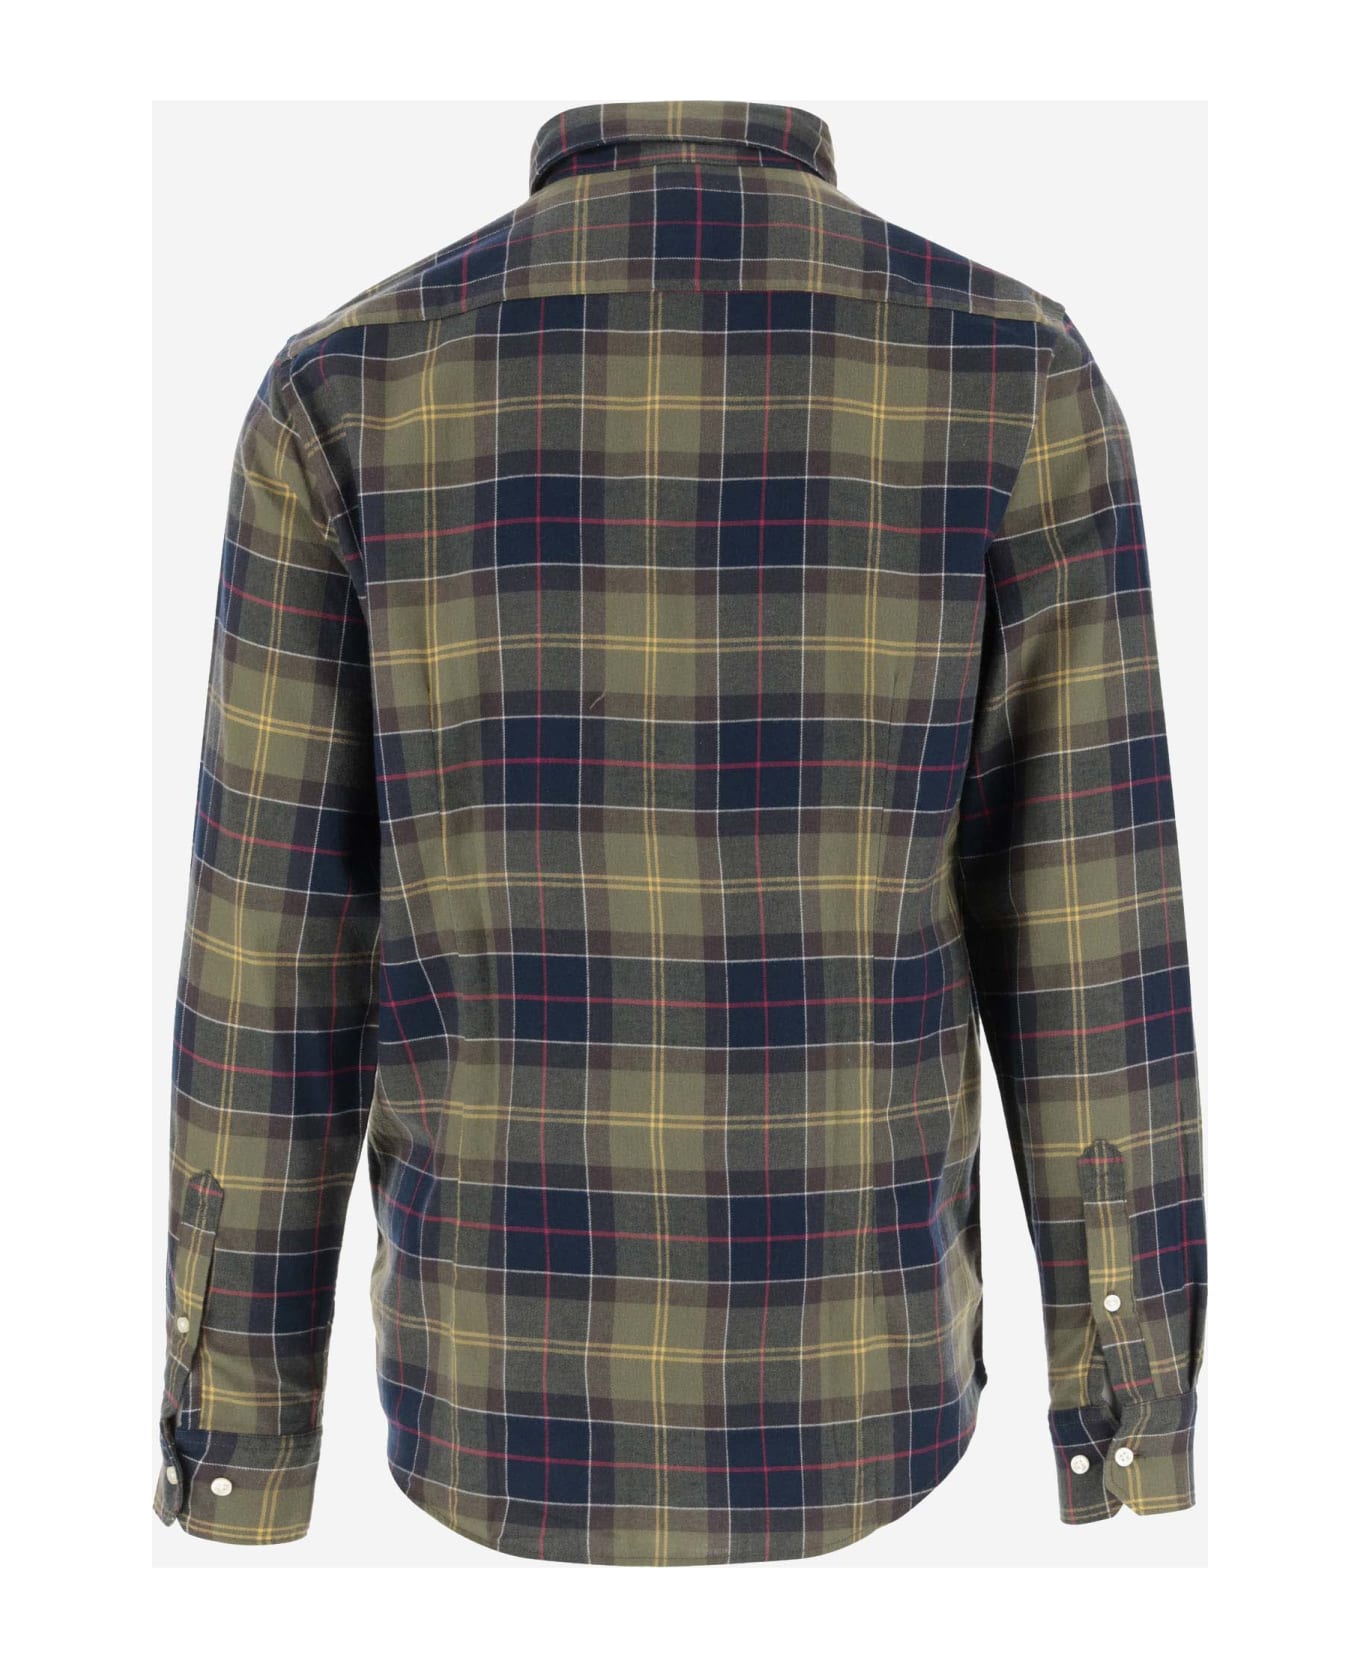 Barbour Cotton Shirt With Check Pattern - Classic Tartan